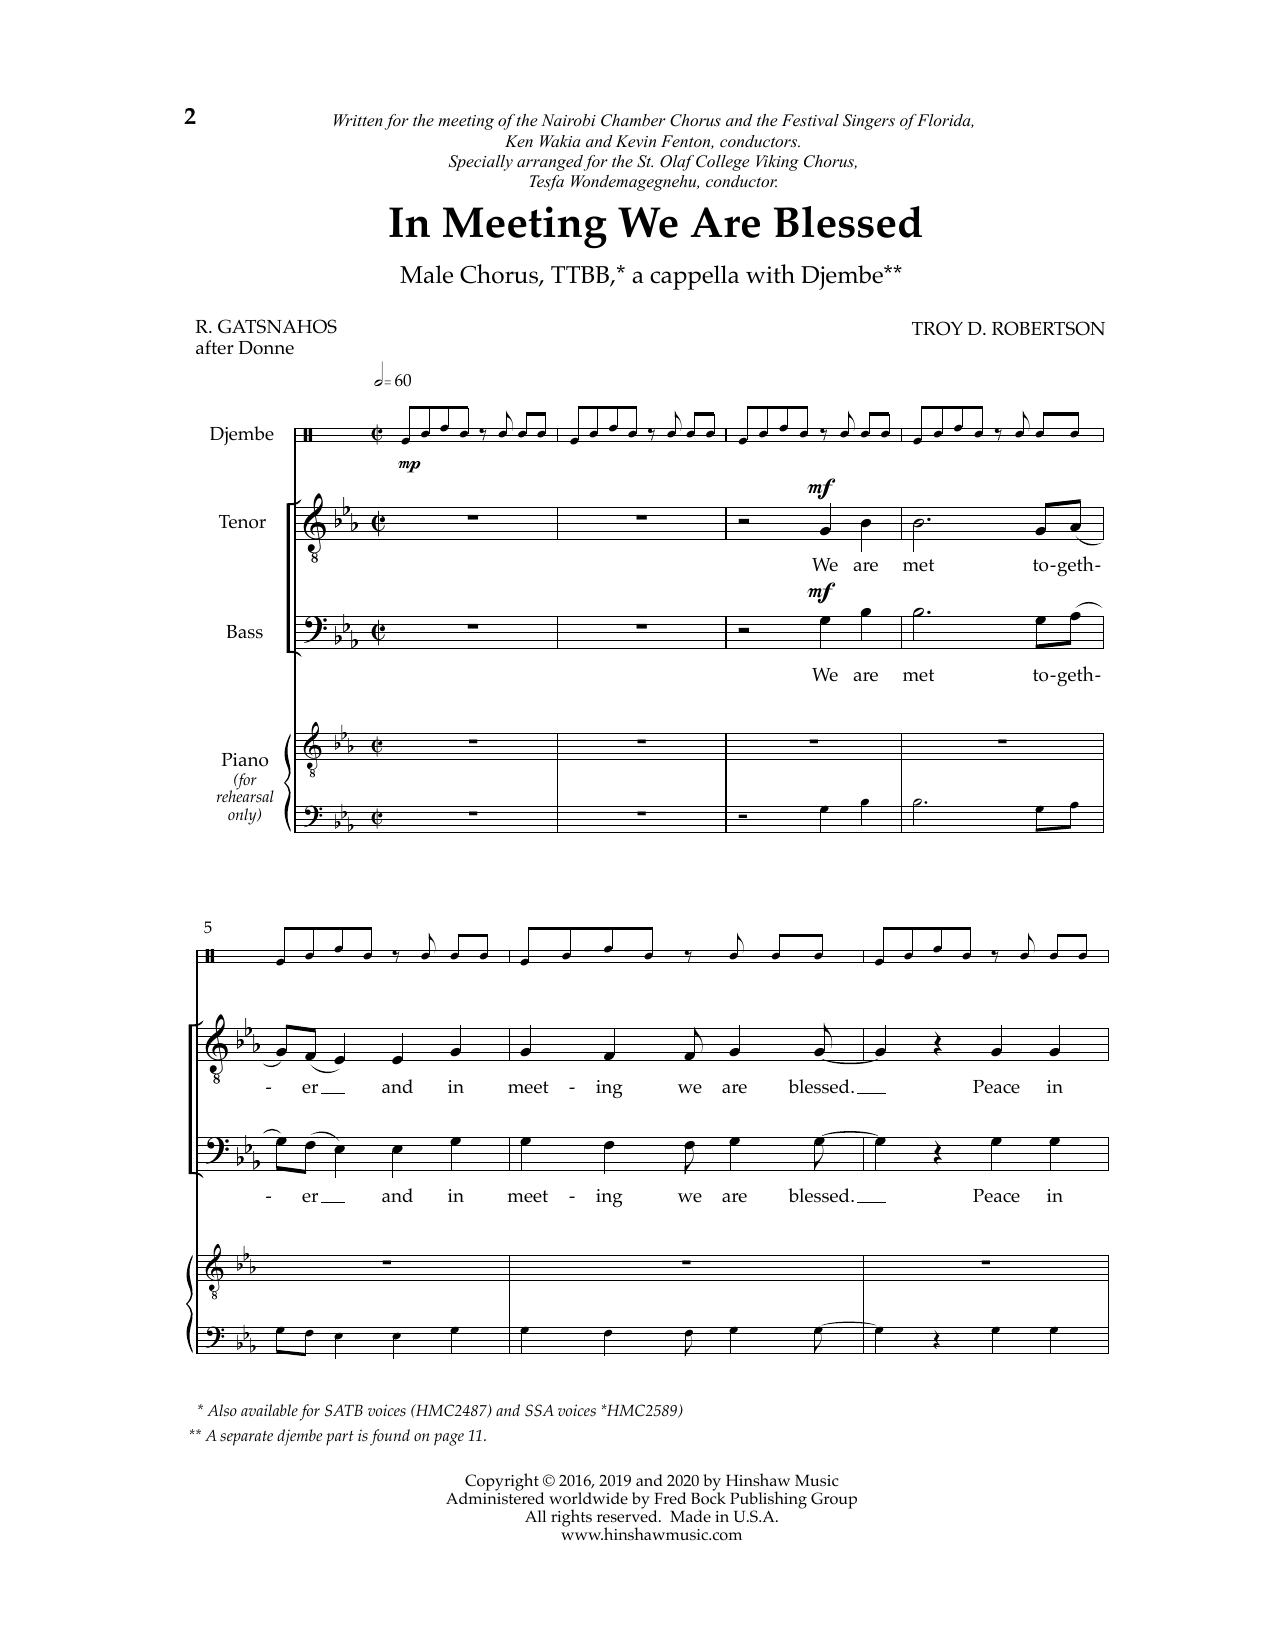 Download Troy Robertson In Meeting We Are Blessed Sheet Music